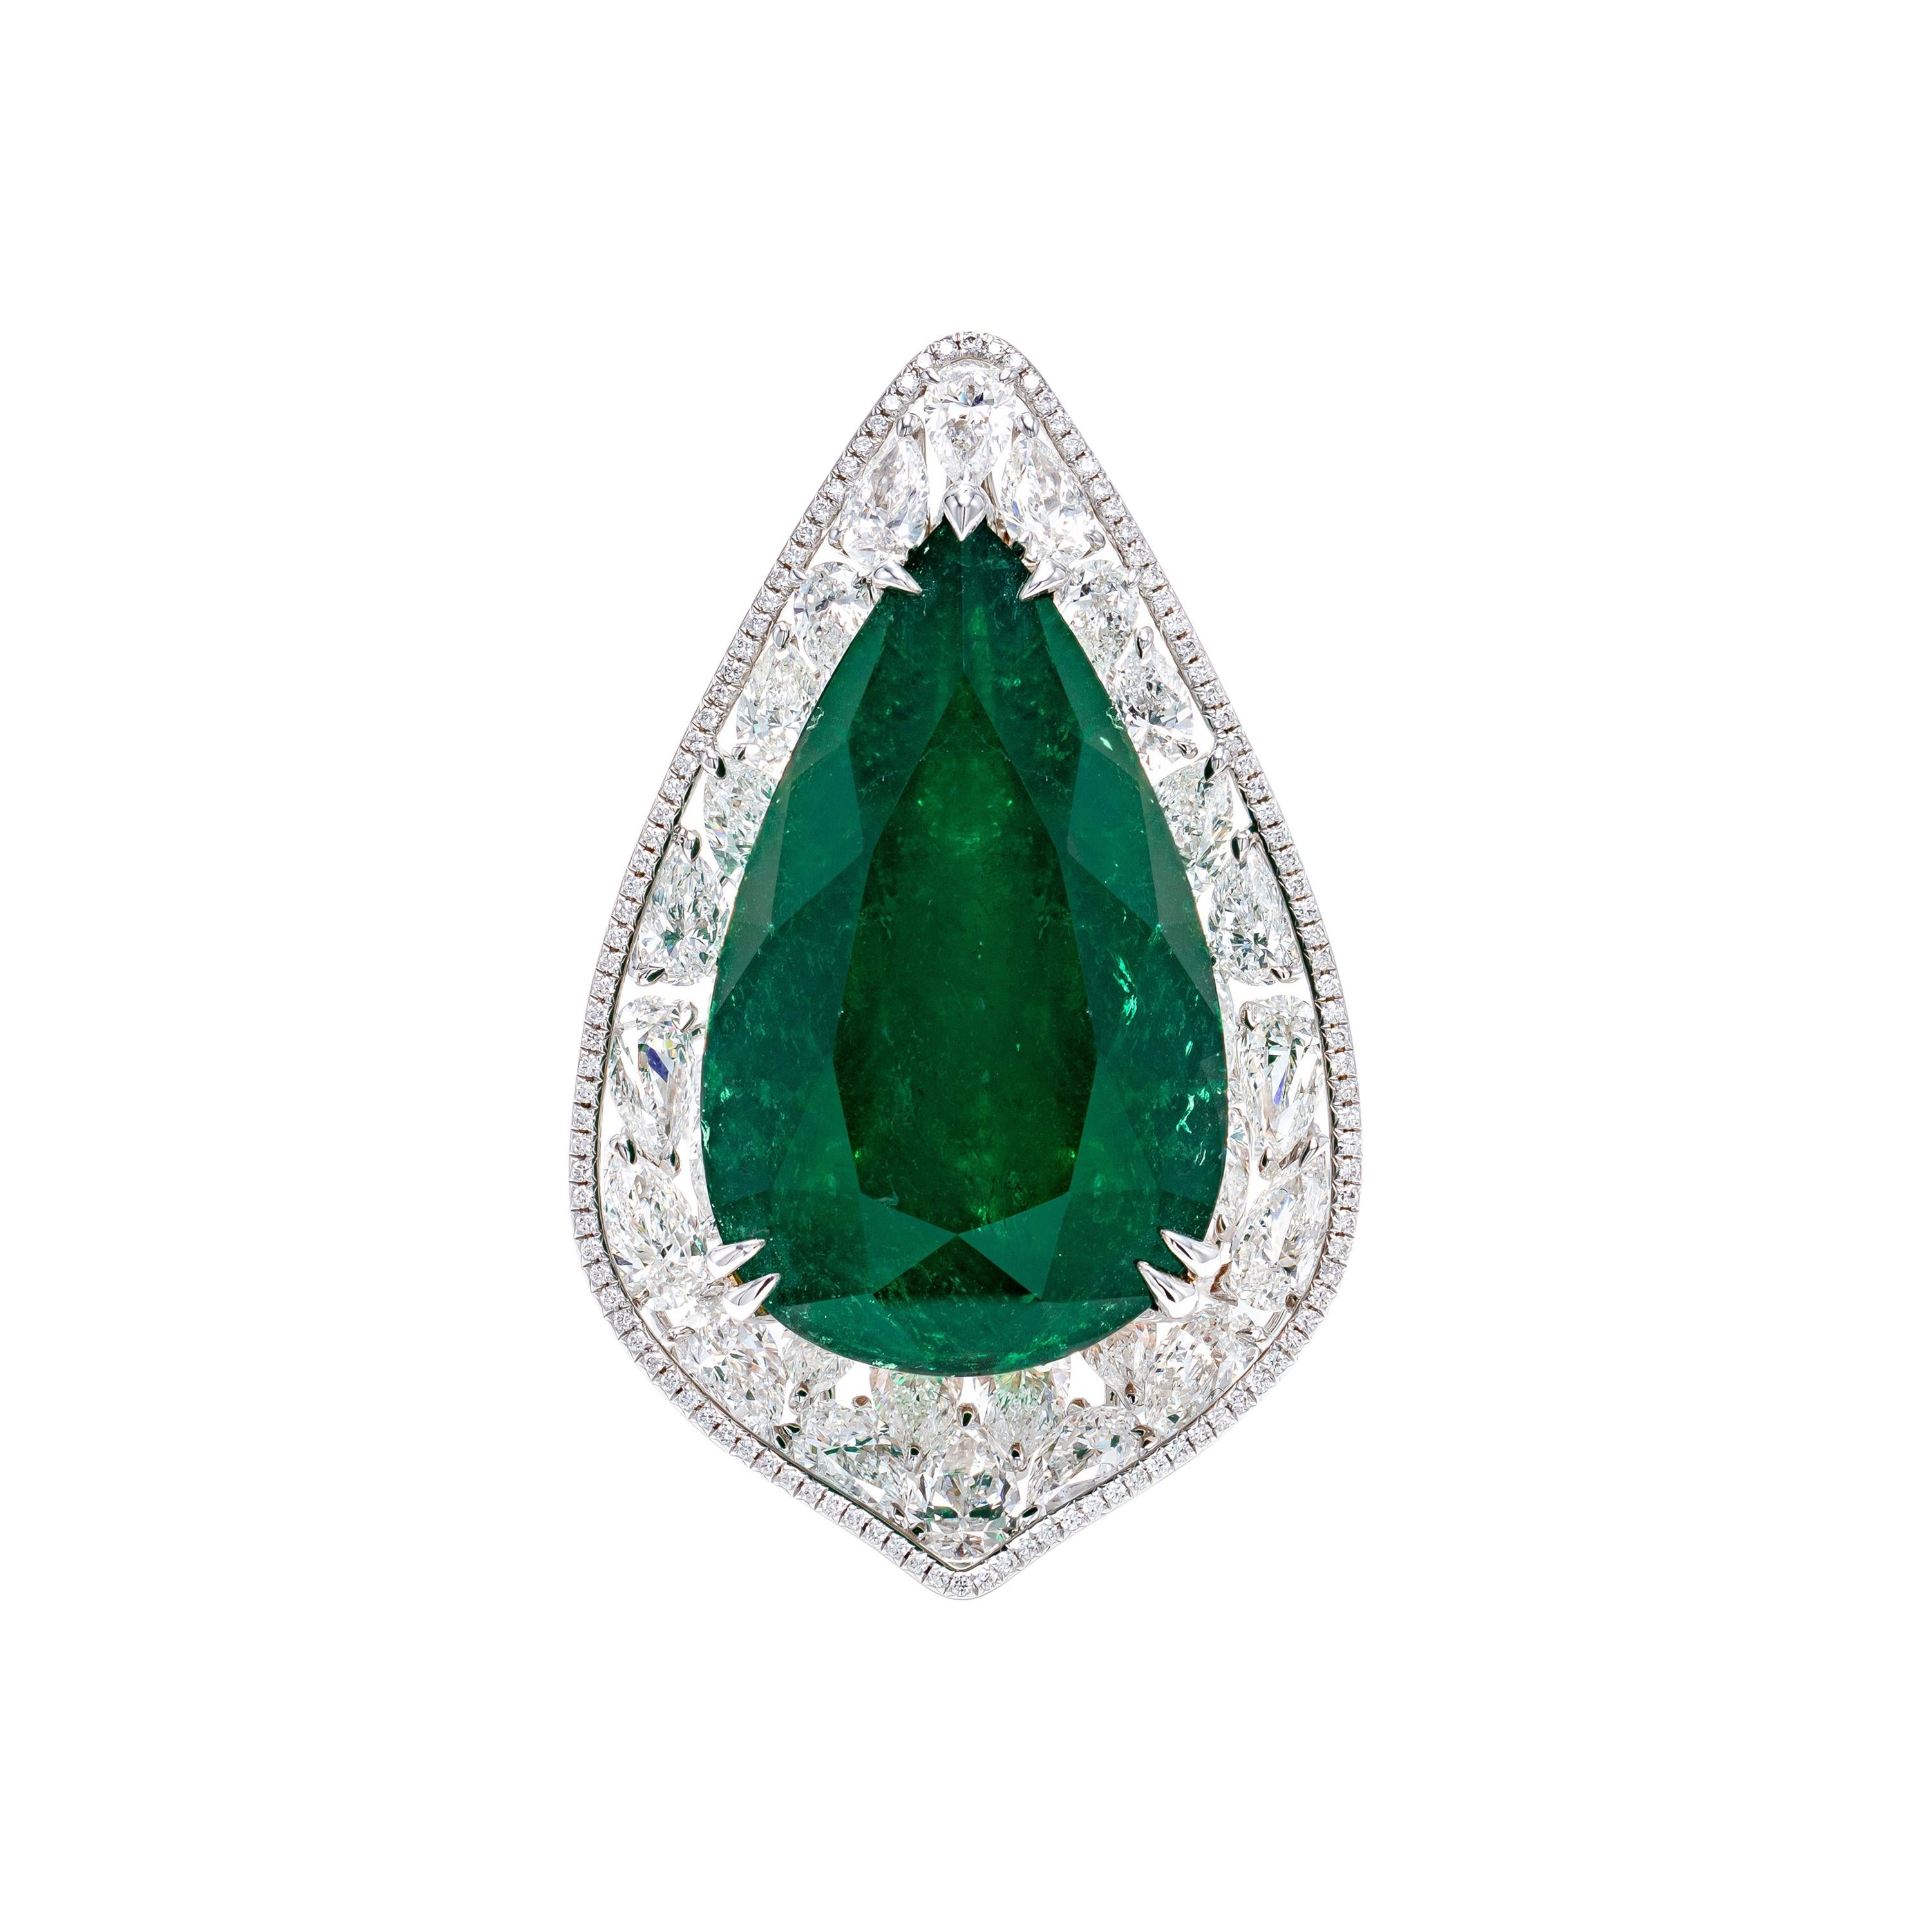 Gubelin Certified 31.16 Carat Colombian Emerald and Diamond Ring in 18K Gold For Sale